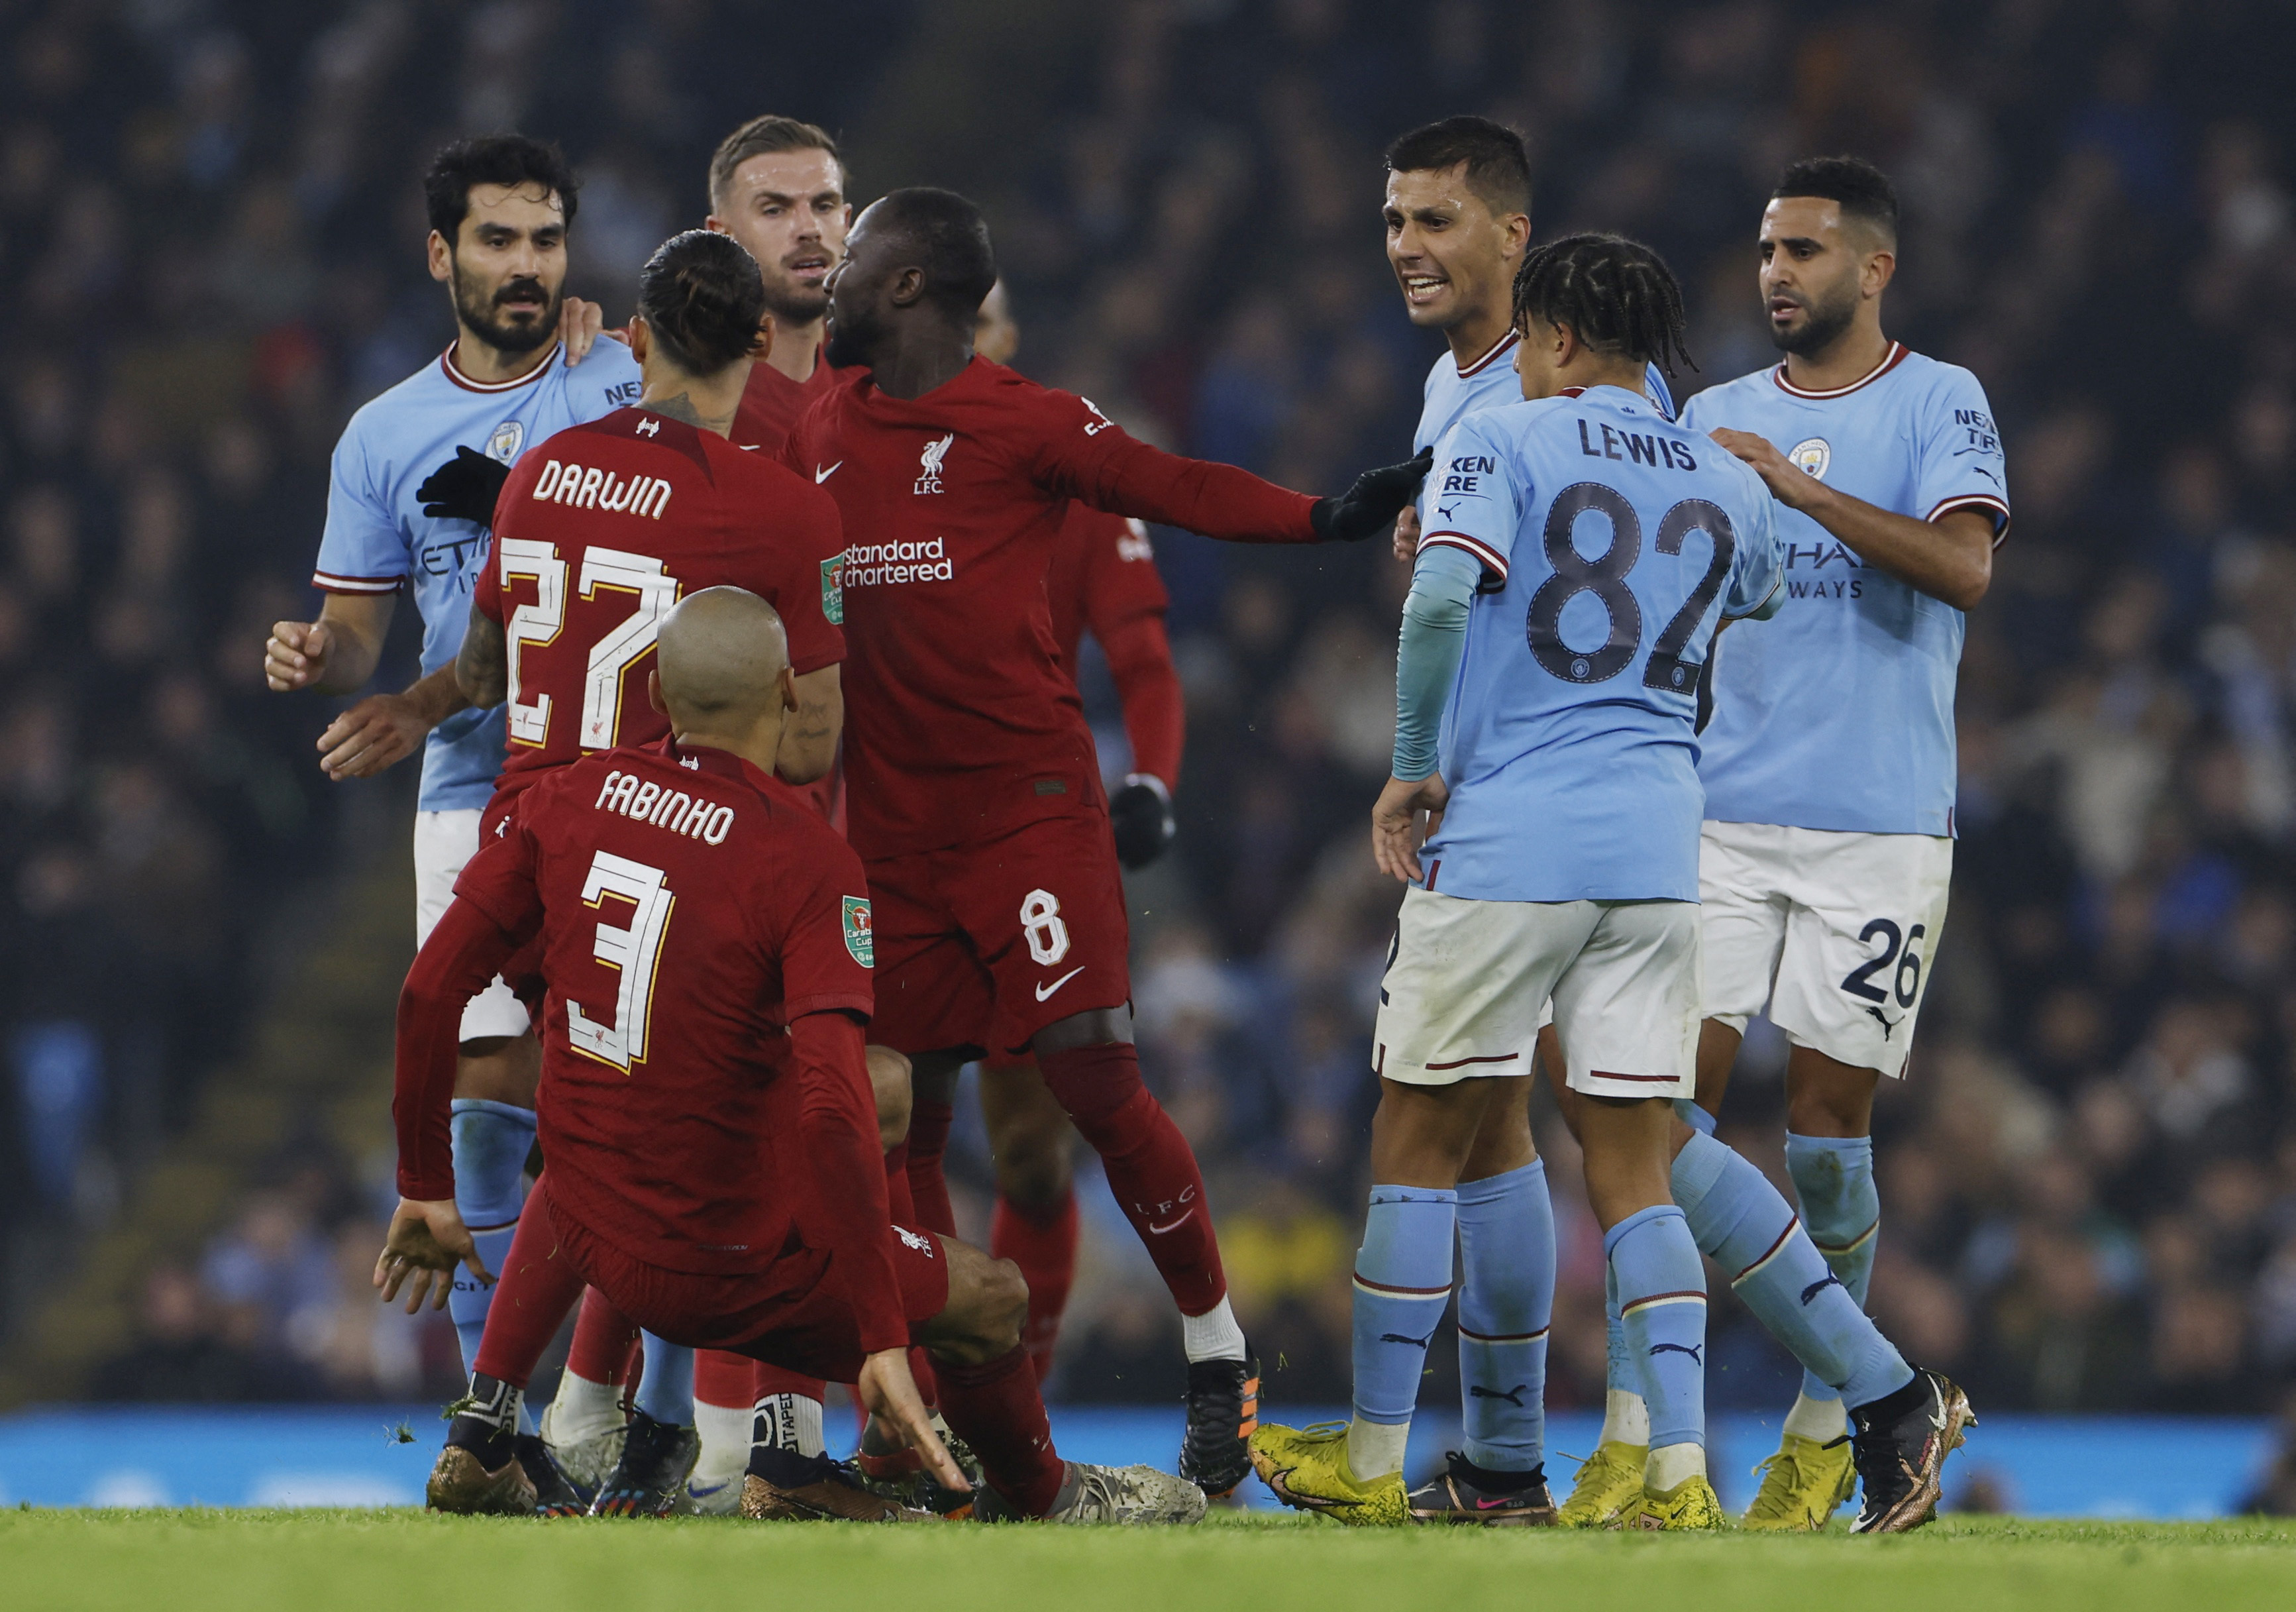 Soccer Football - Carabao Cup - Round of 16 - Manchester City v Liverpool - Etihad Stadium, Manchester, Britain - December 22, 2022 Liverpool's Fabinho clashes with Manchester City's Rodri as Ilkay Gundogun, Riyad Mahrez, Liverpool's Jordan Henderson, Darwin Nunez, Naby Keita and teammates look on Action Images via Reuters/Jason Cairnduff EDITORIAL USE ONLY.  Do not use with unauthorized audio, video, data, fixture lists, club/league logos or 'live' services.  Online in-match use limited to 75 images, no video emulation.  Do not use in betting, games or single club/league/player publications.  Please contact your account representative for further details.